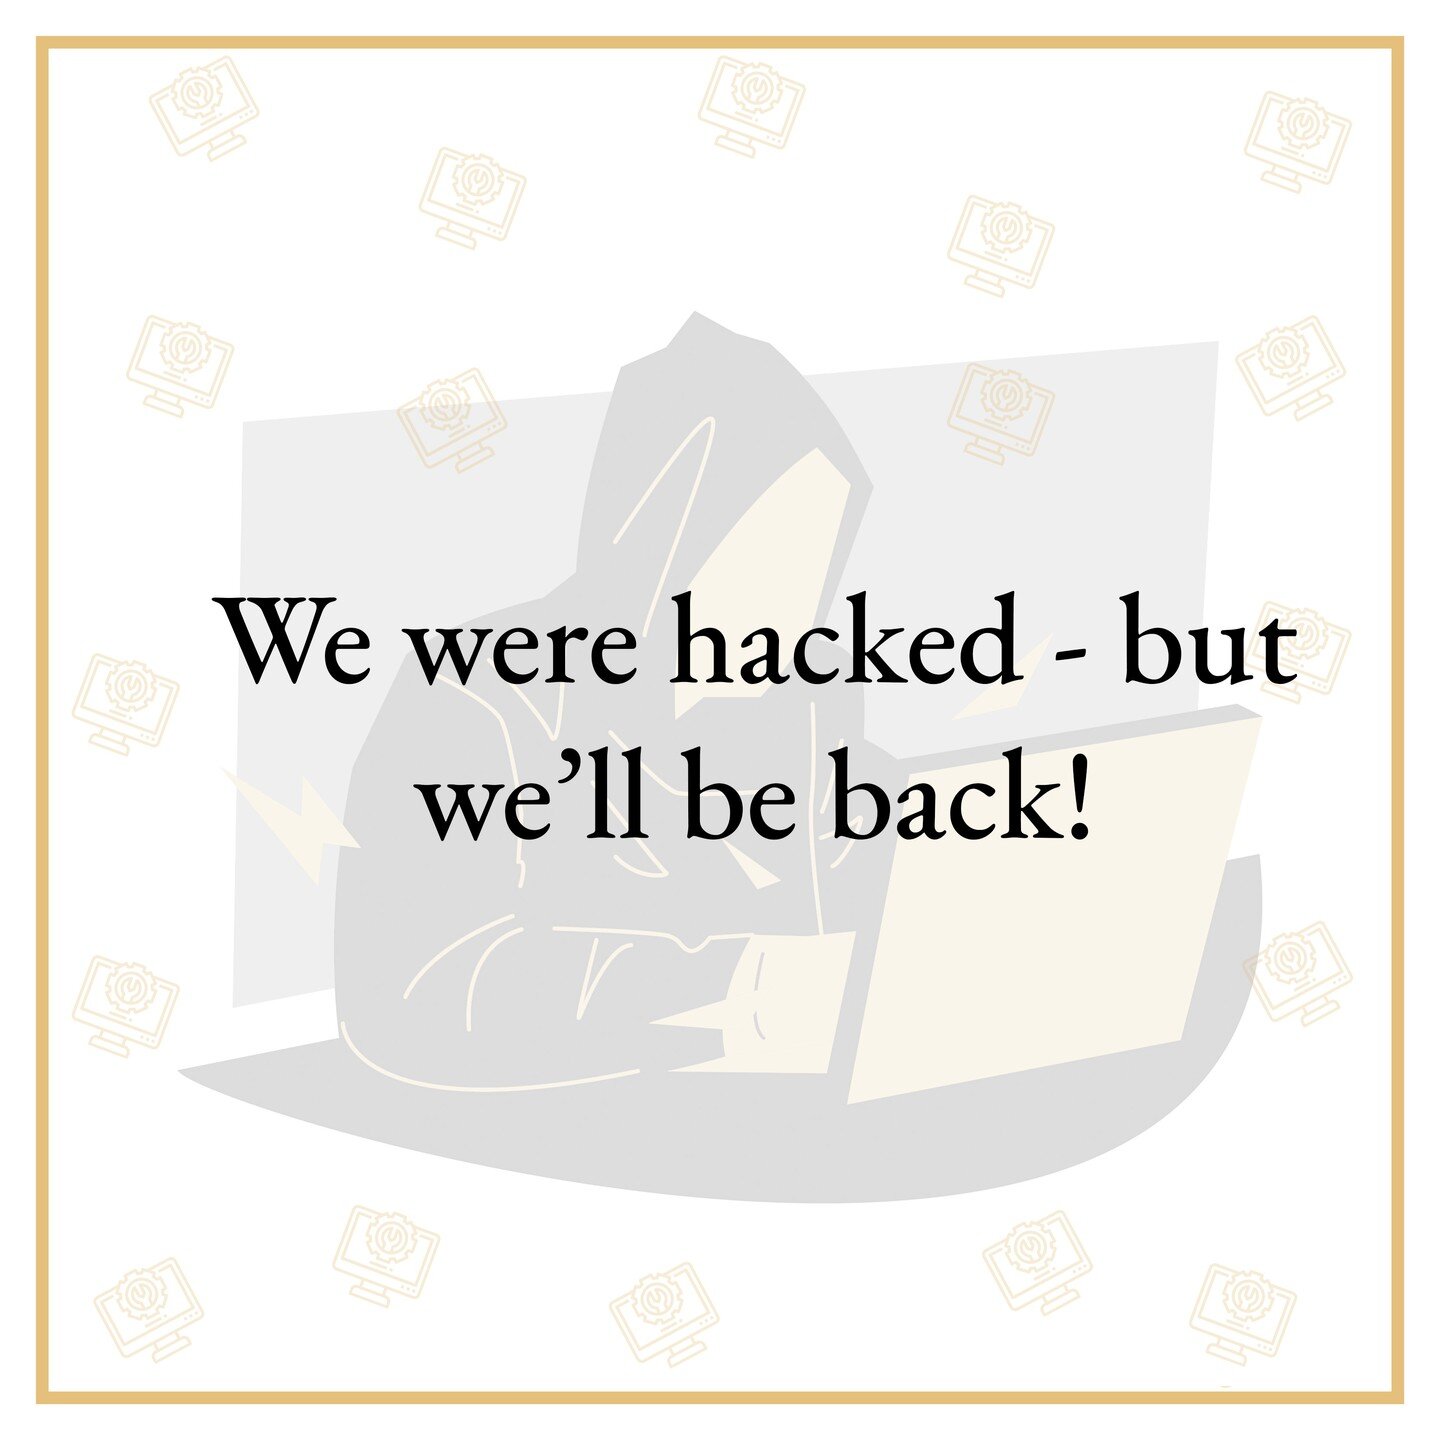 Hey everyone, we've got some not-so-fun news to share with you today. Our business page was hacked by some sneaky cybercriminals 😒 But you know what they say, &quot;when the going gets tough, the tough get going!&quot; 💪🏼

Some of you may have see